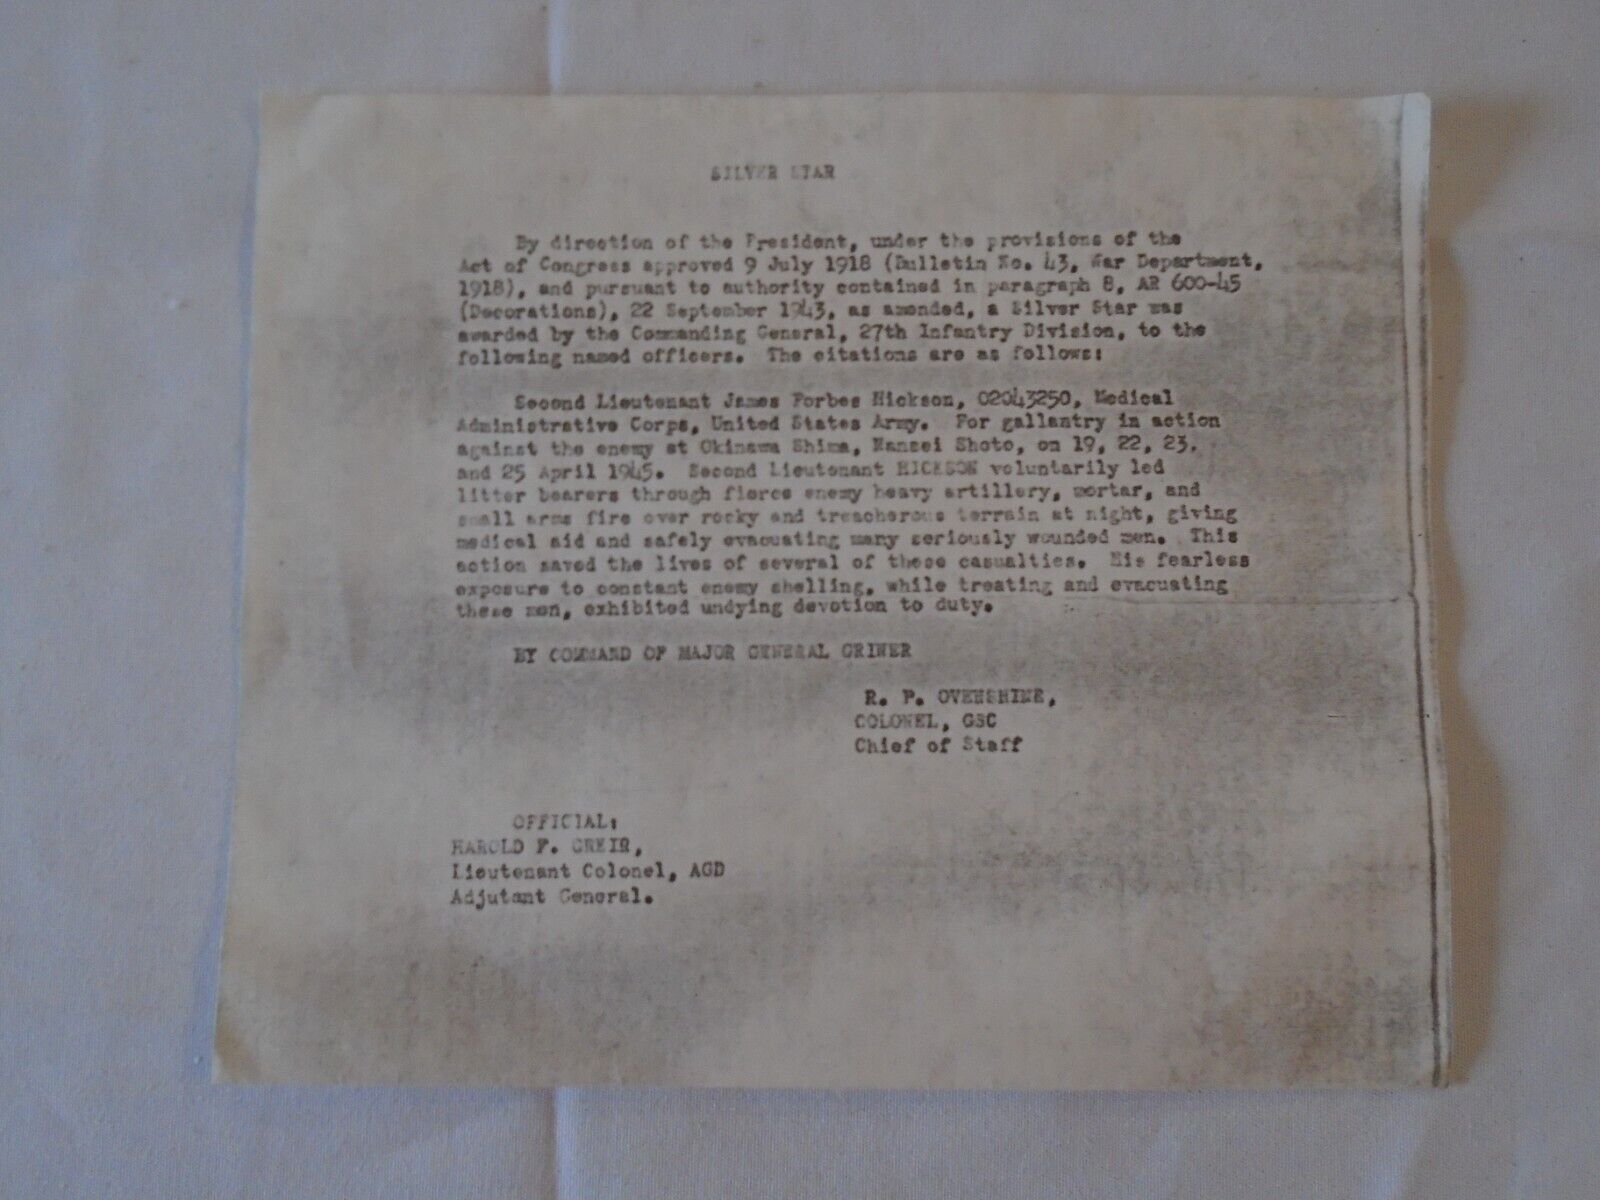 1945 WWII Okinawa Japan Copy of US Army Silver Star Letter Award Notification